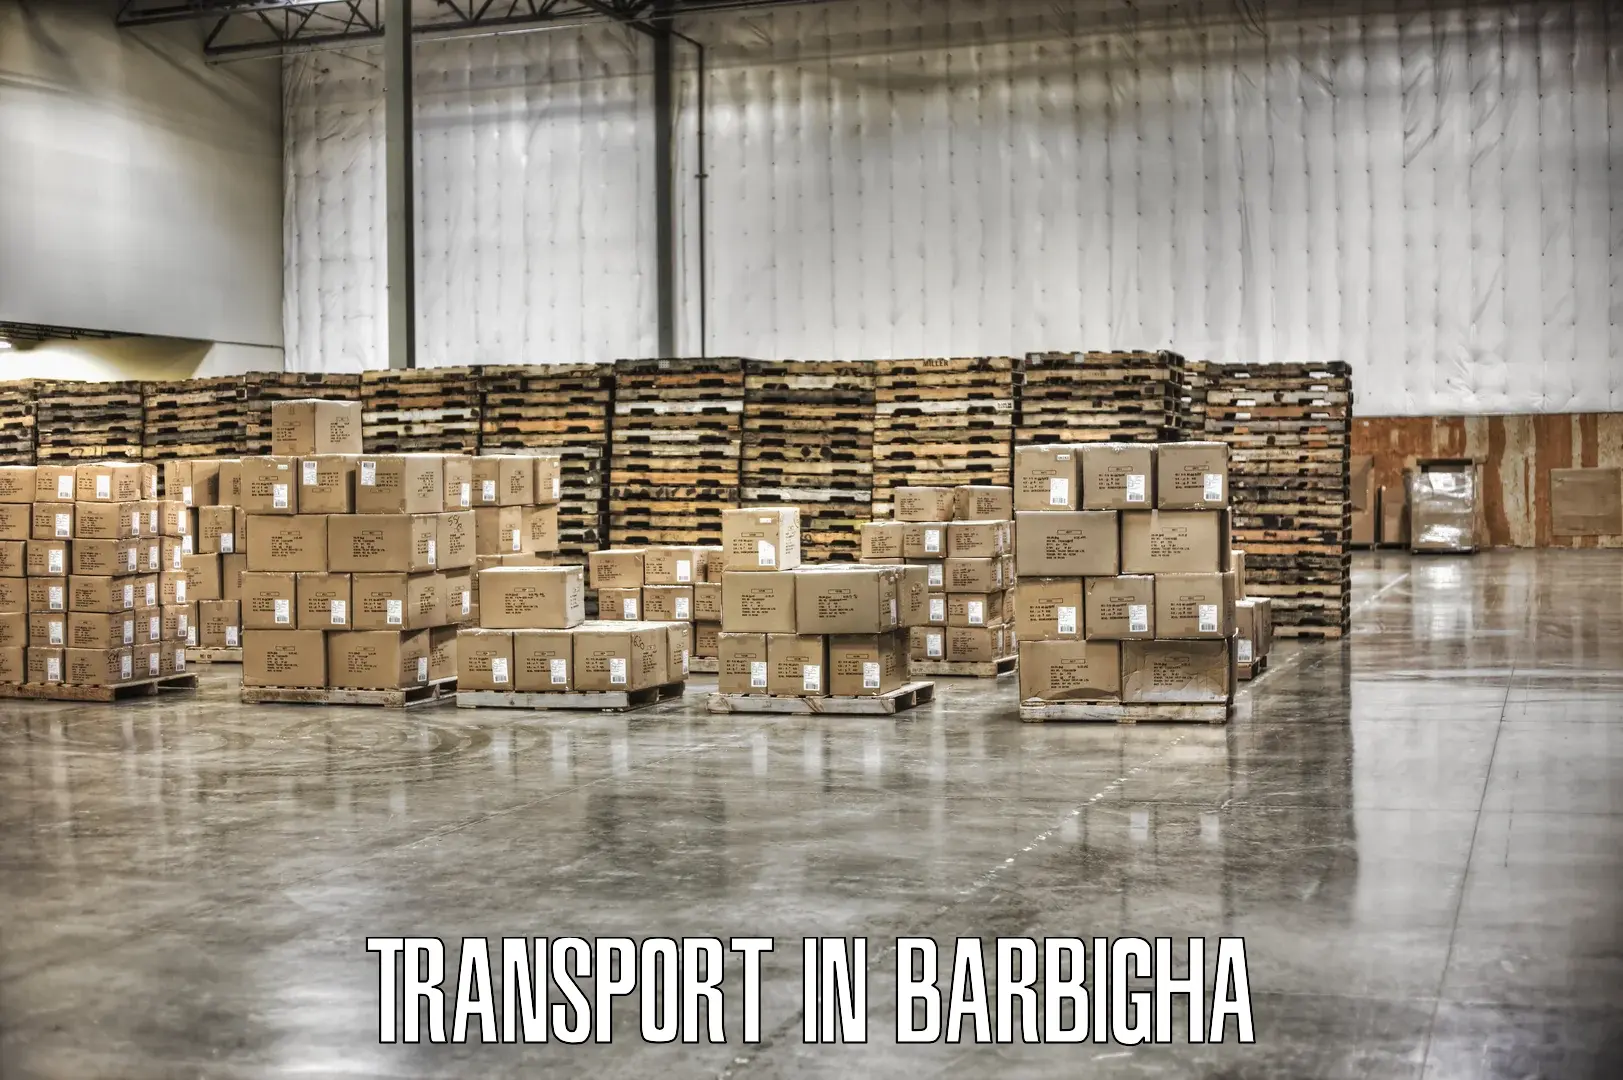 Parcel transport services in Barbigha